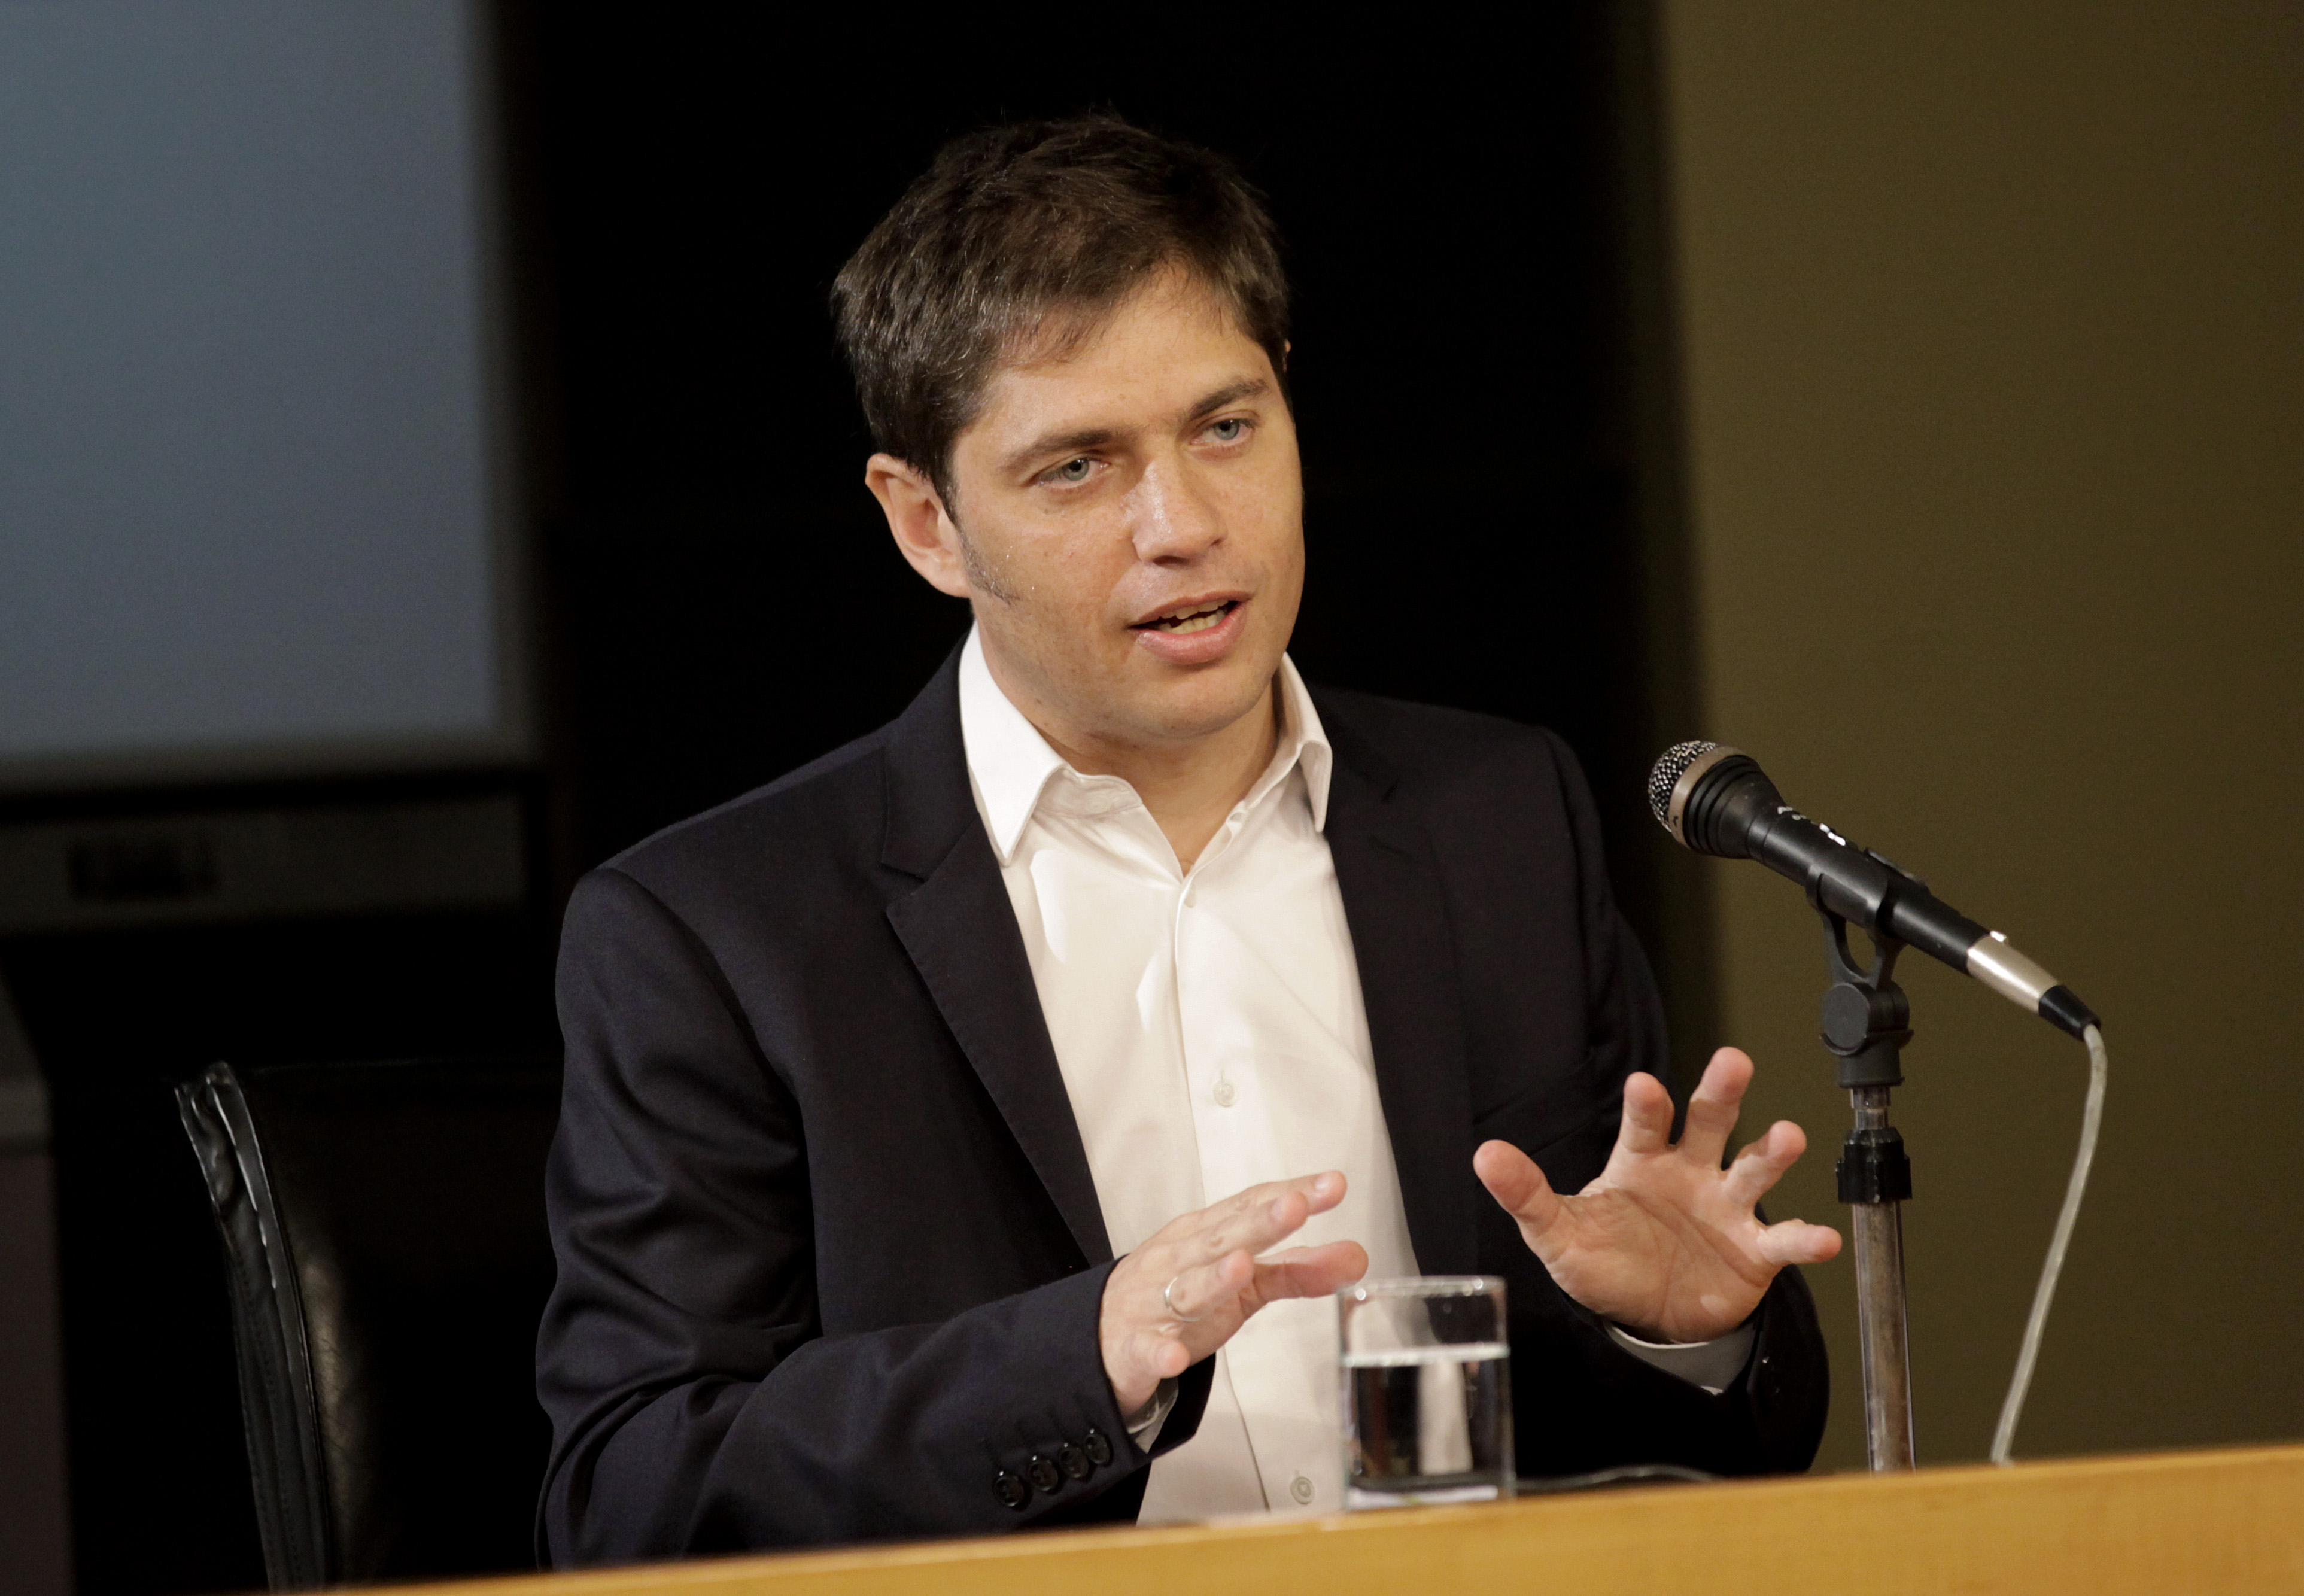 Axel Kicillof, economy minister for Argentina, speaks during a news conference in Buenos Aires, Argentina, on Wednesday, Aug. 20, 2014. (Bloomberg&mdash;Bloomberg via Getty Images)